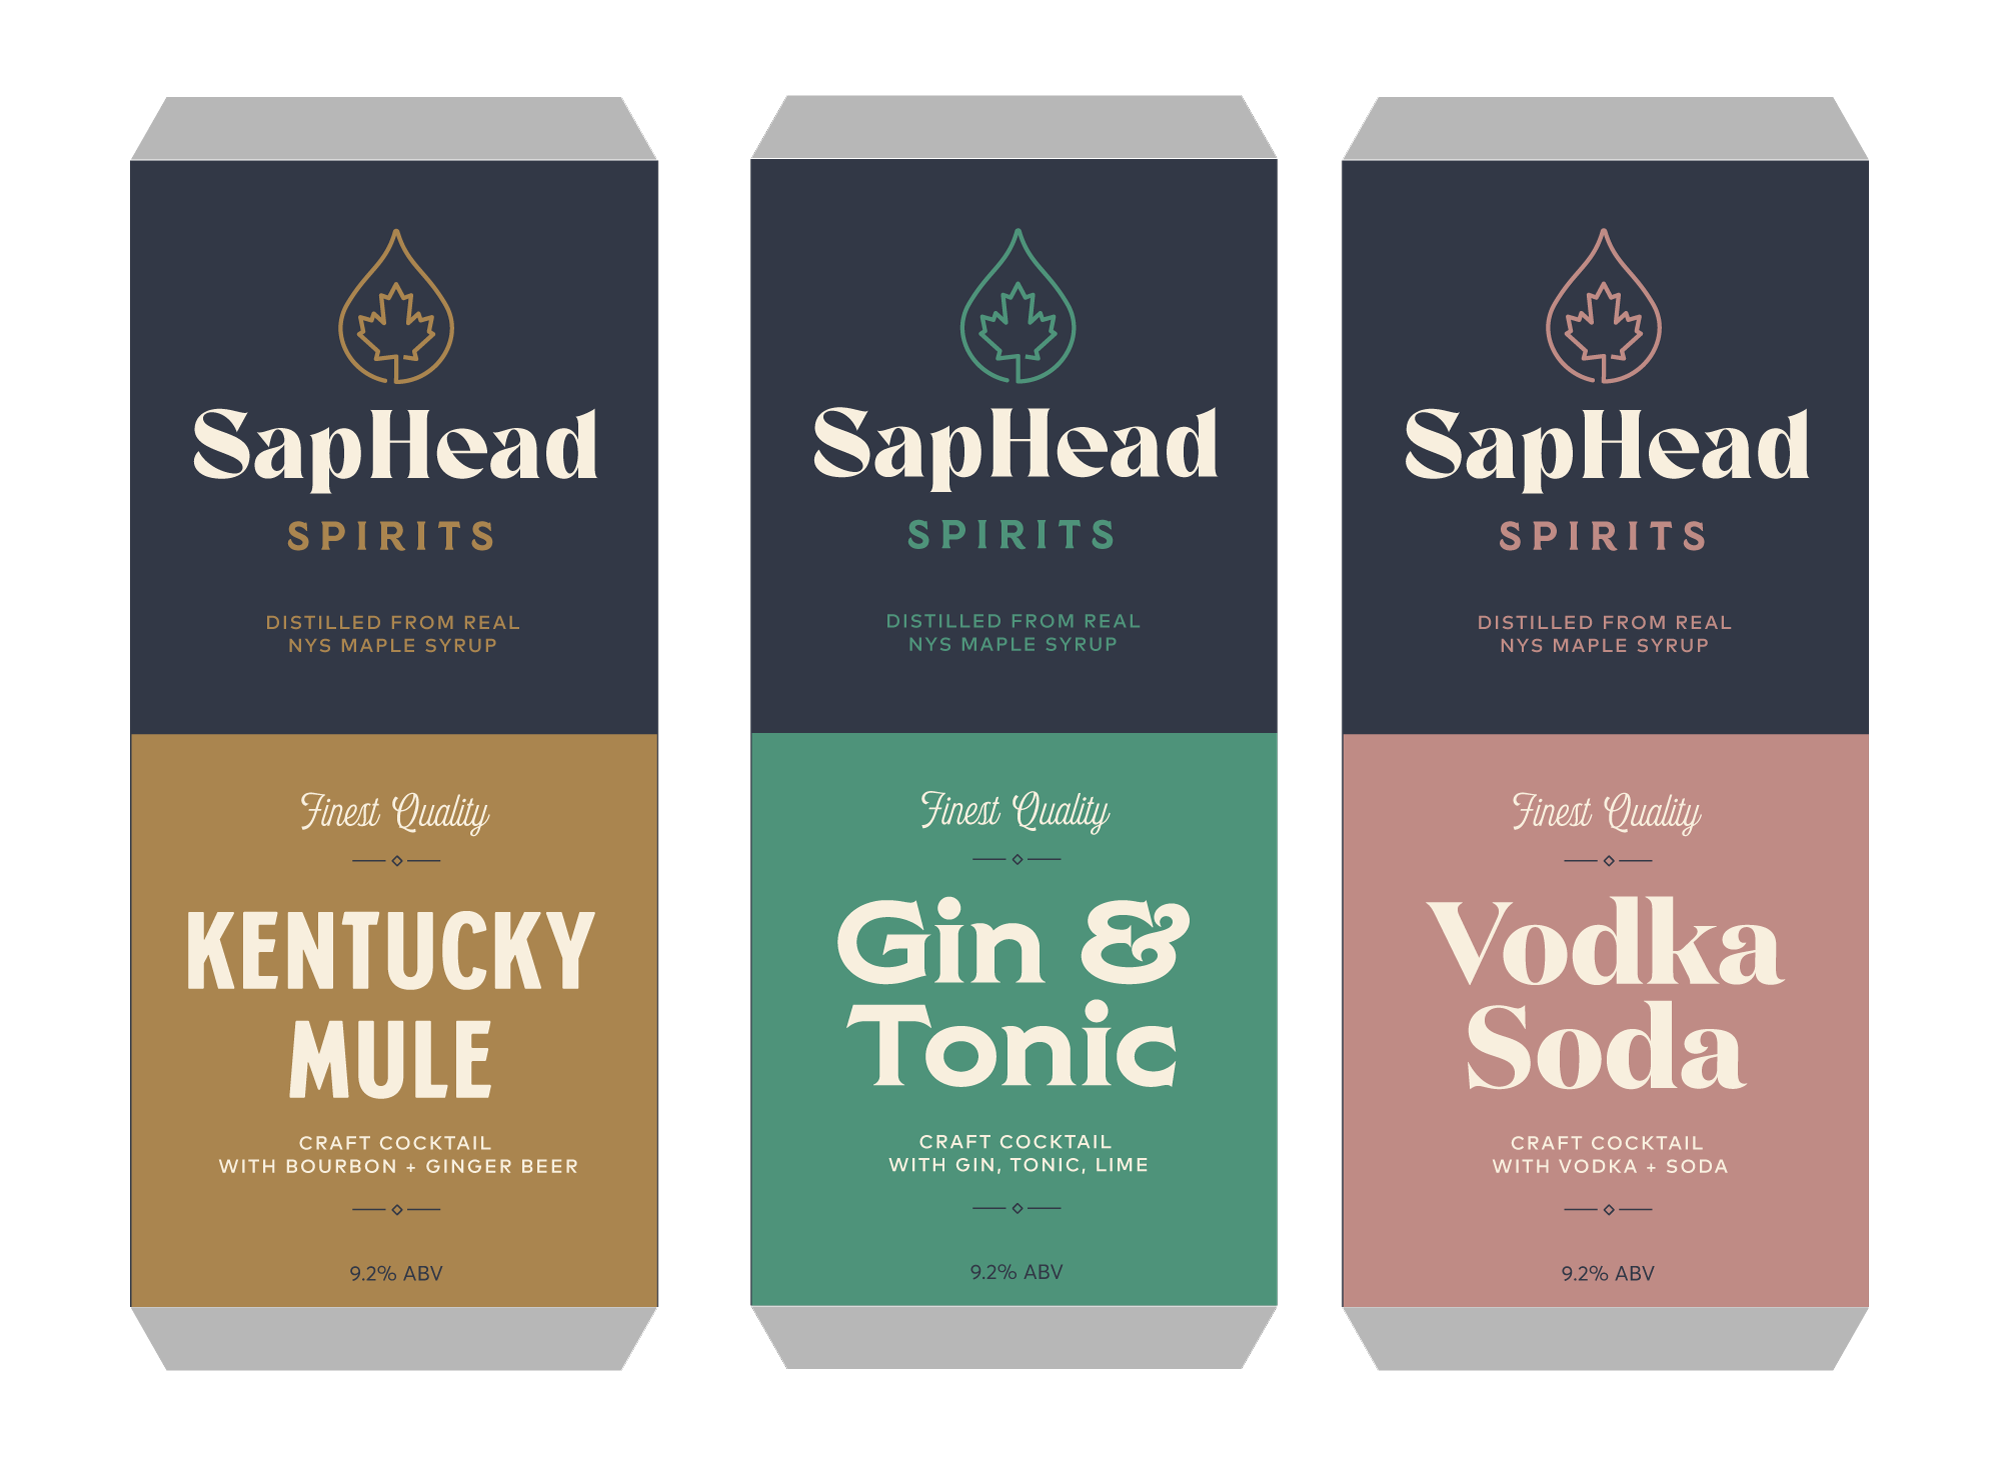 Three illustrated labels for Saphead Spirits showcasing appropriate visual contrasts between elements using hierarchy of shapes, colors and text